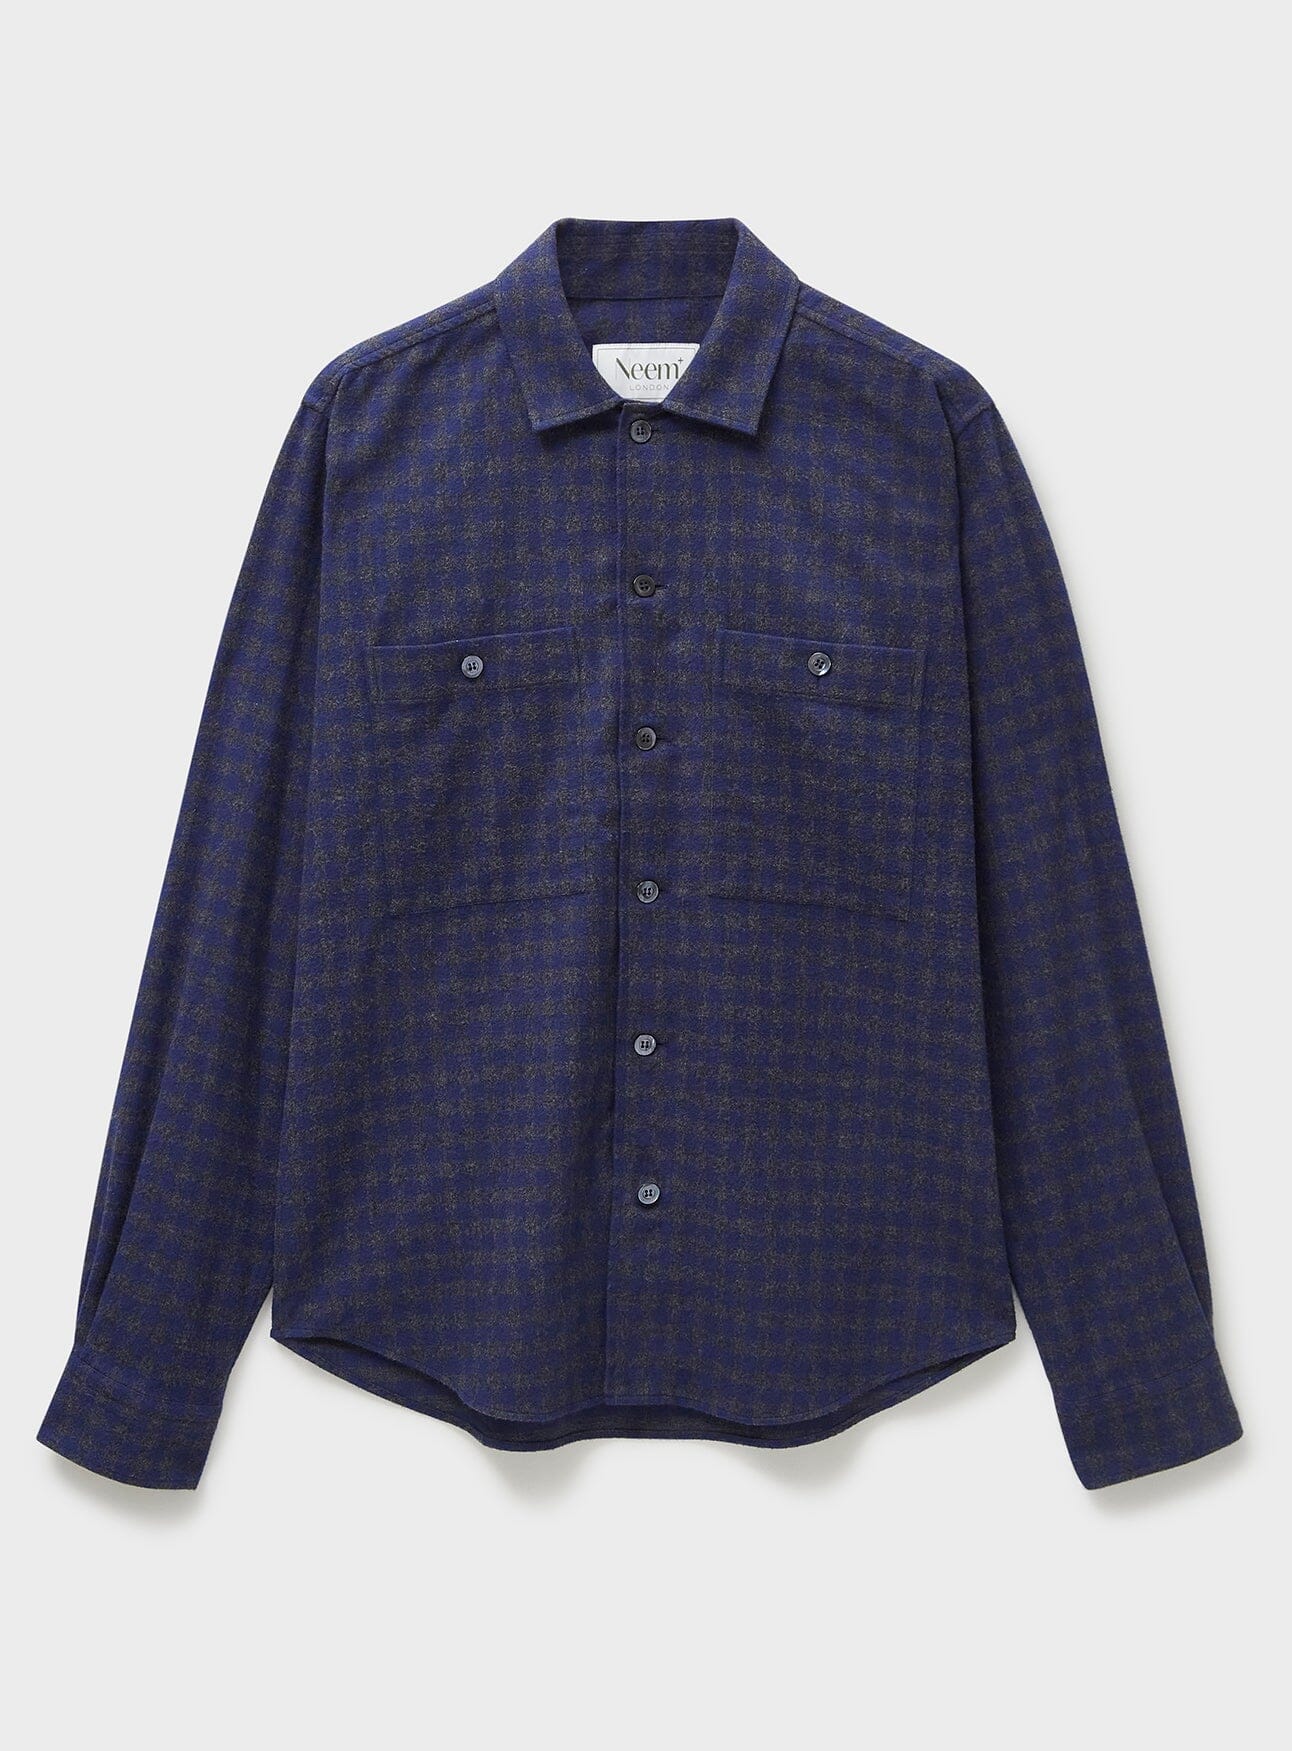 flannel shirt for men sustainable clothing